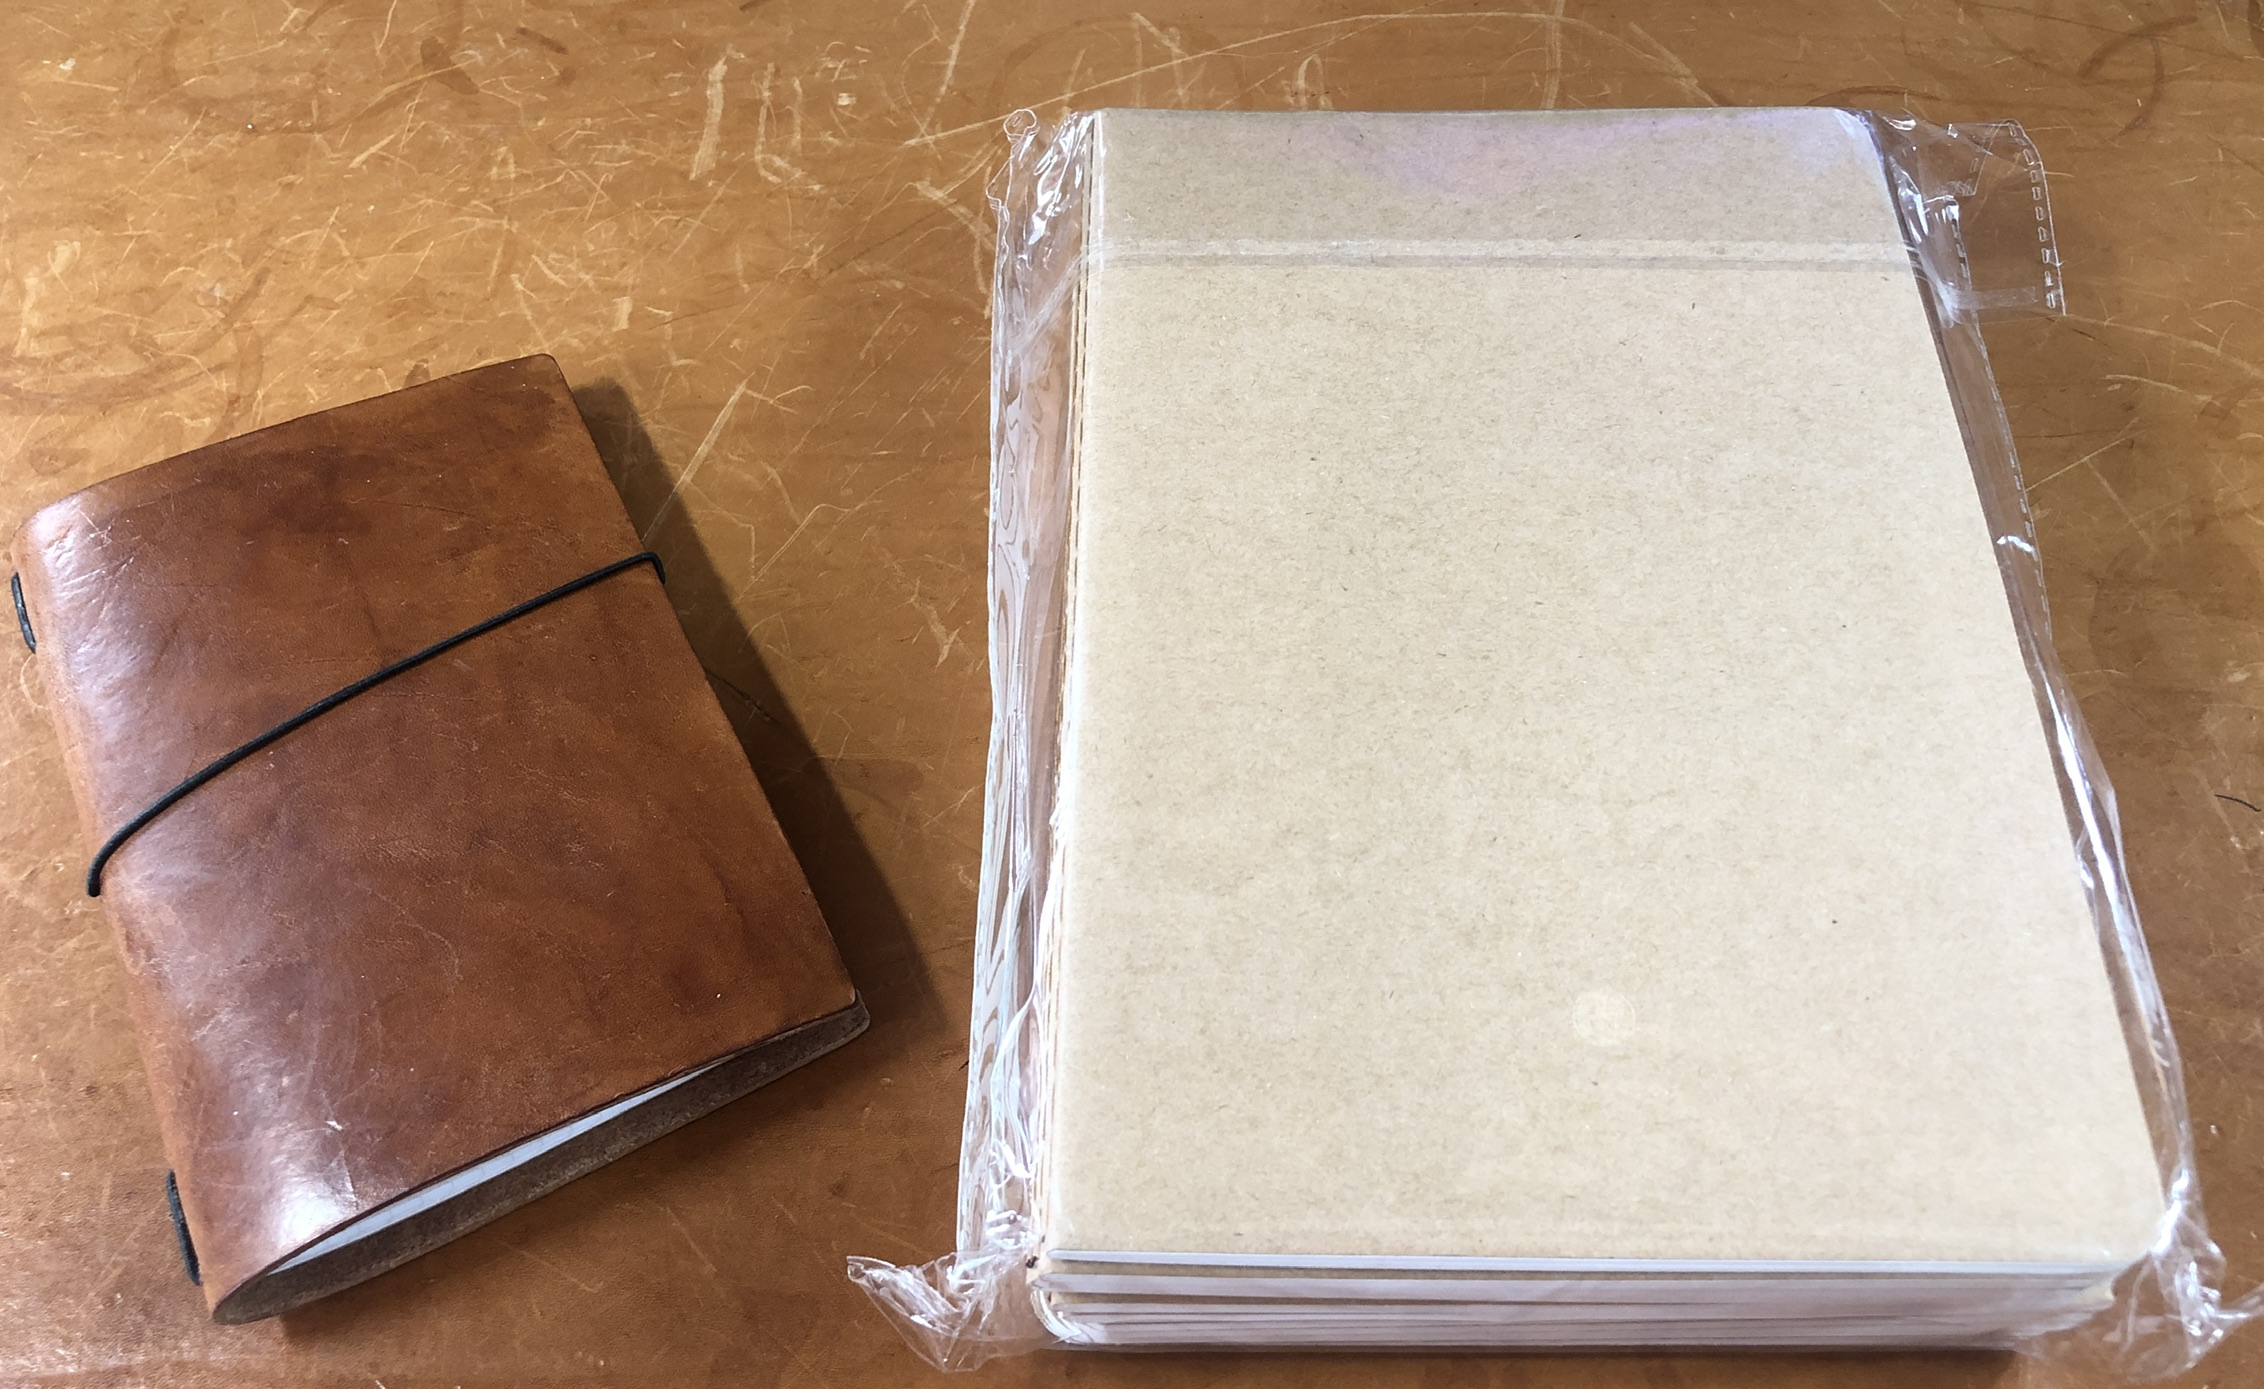 Fieldnotes with leather cover, left. New notebooks, right.